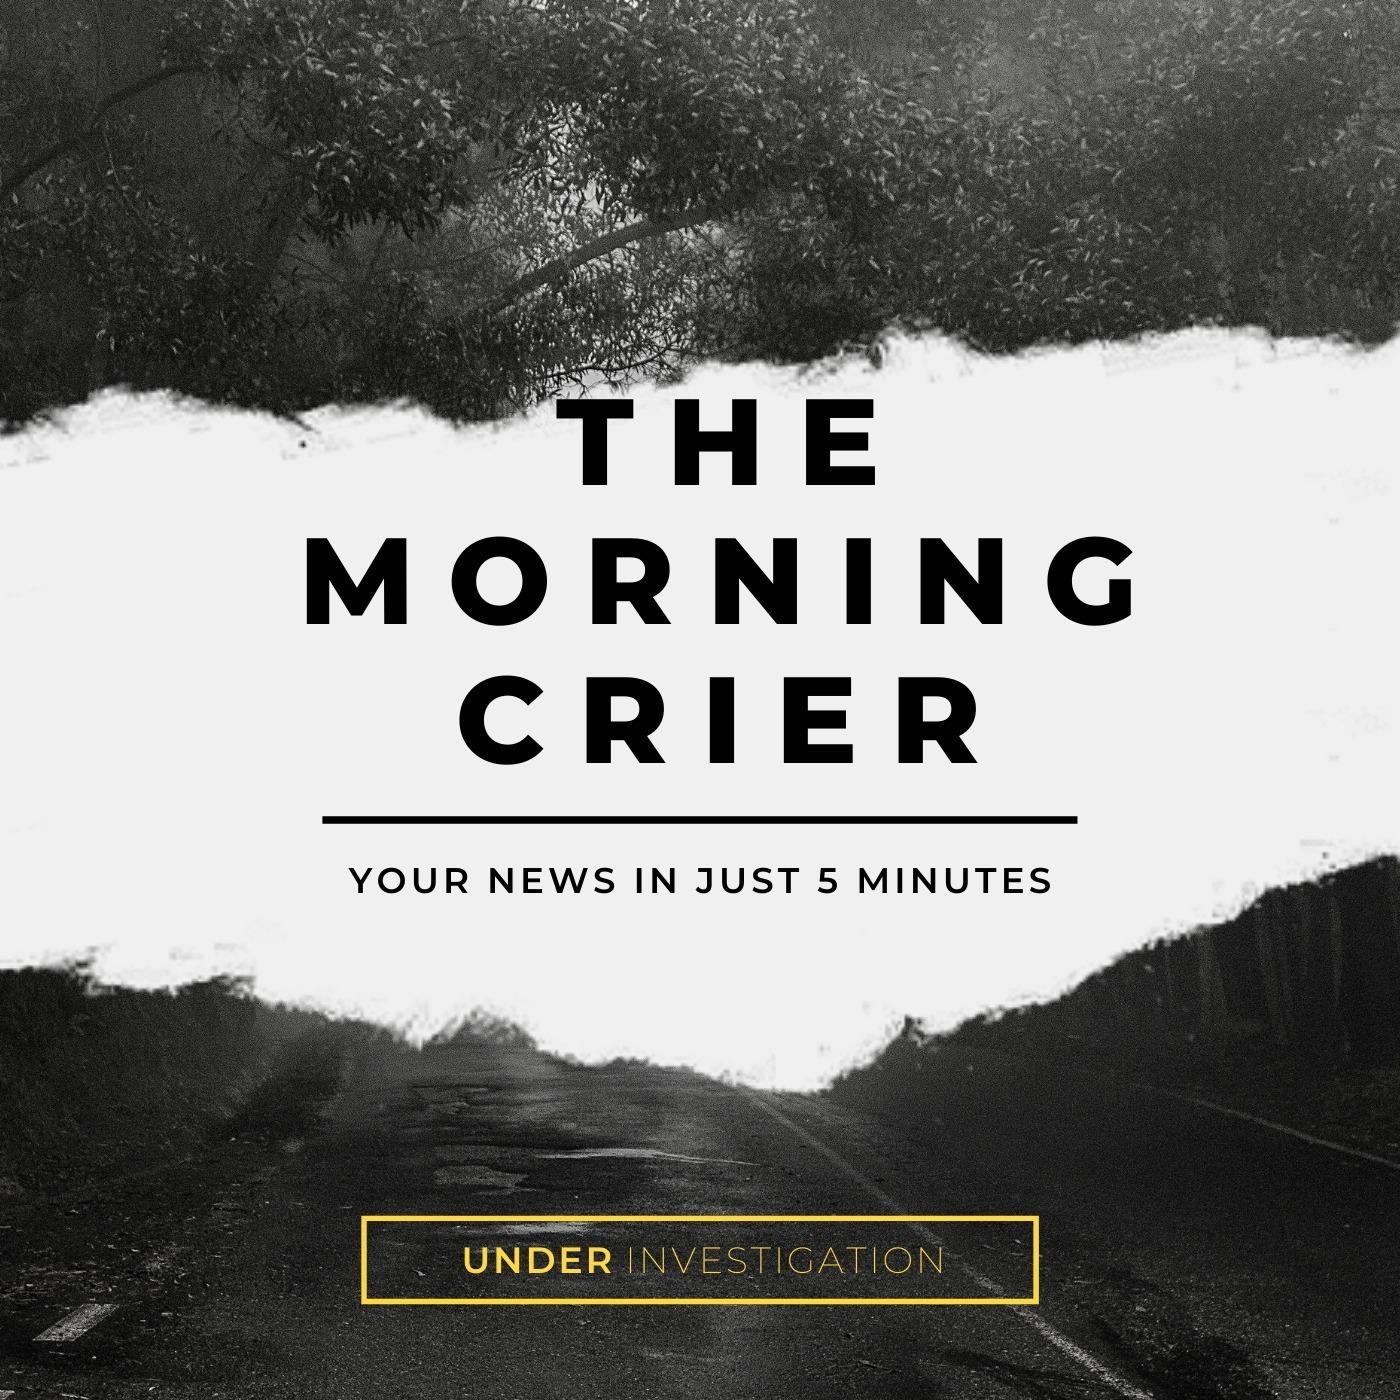 The Morning crier